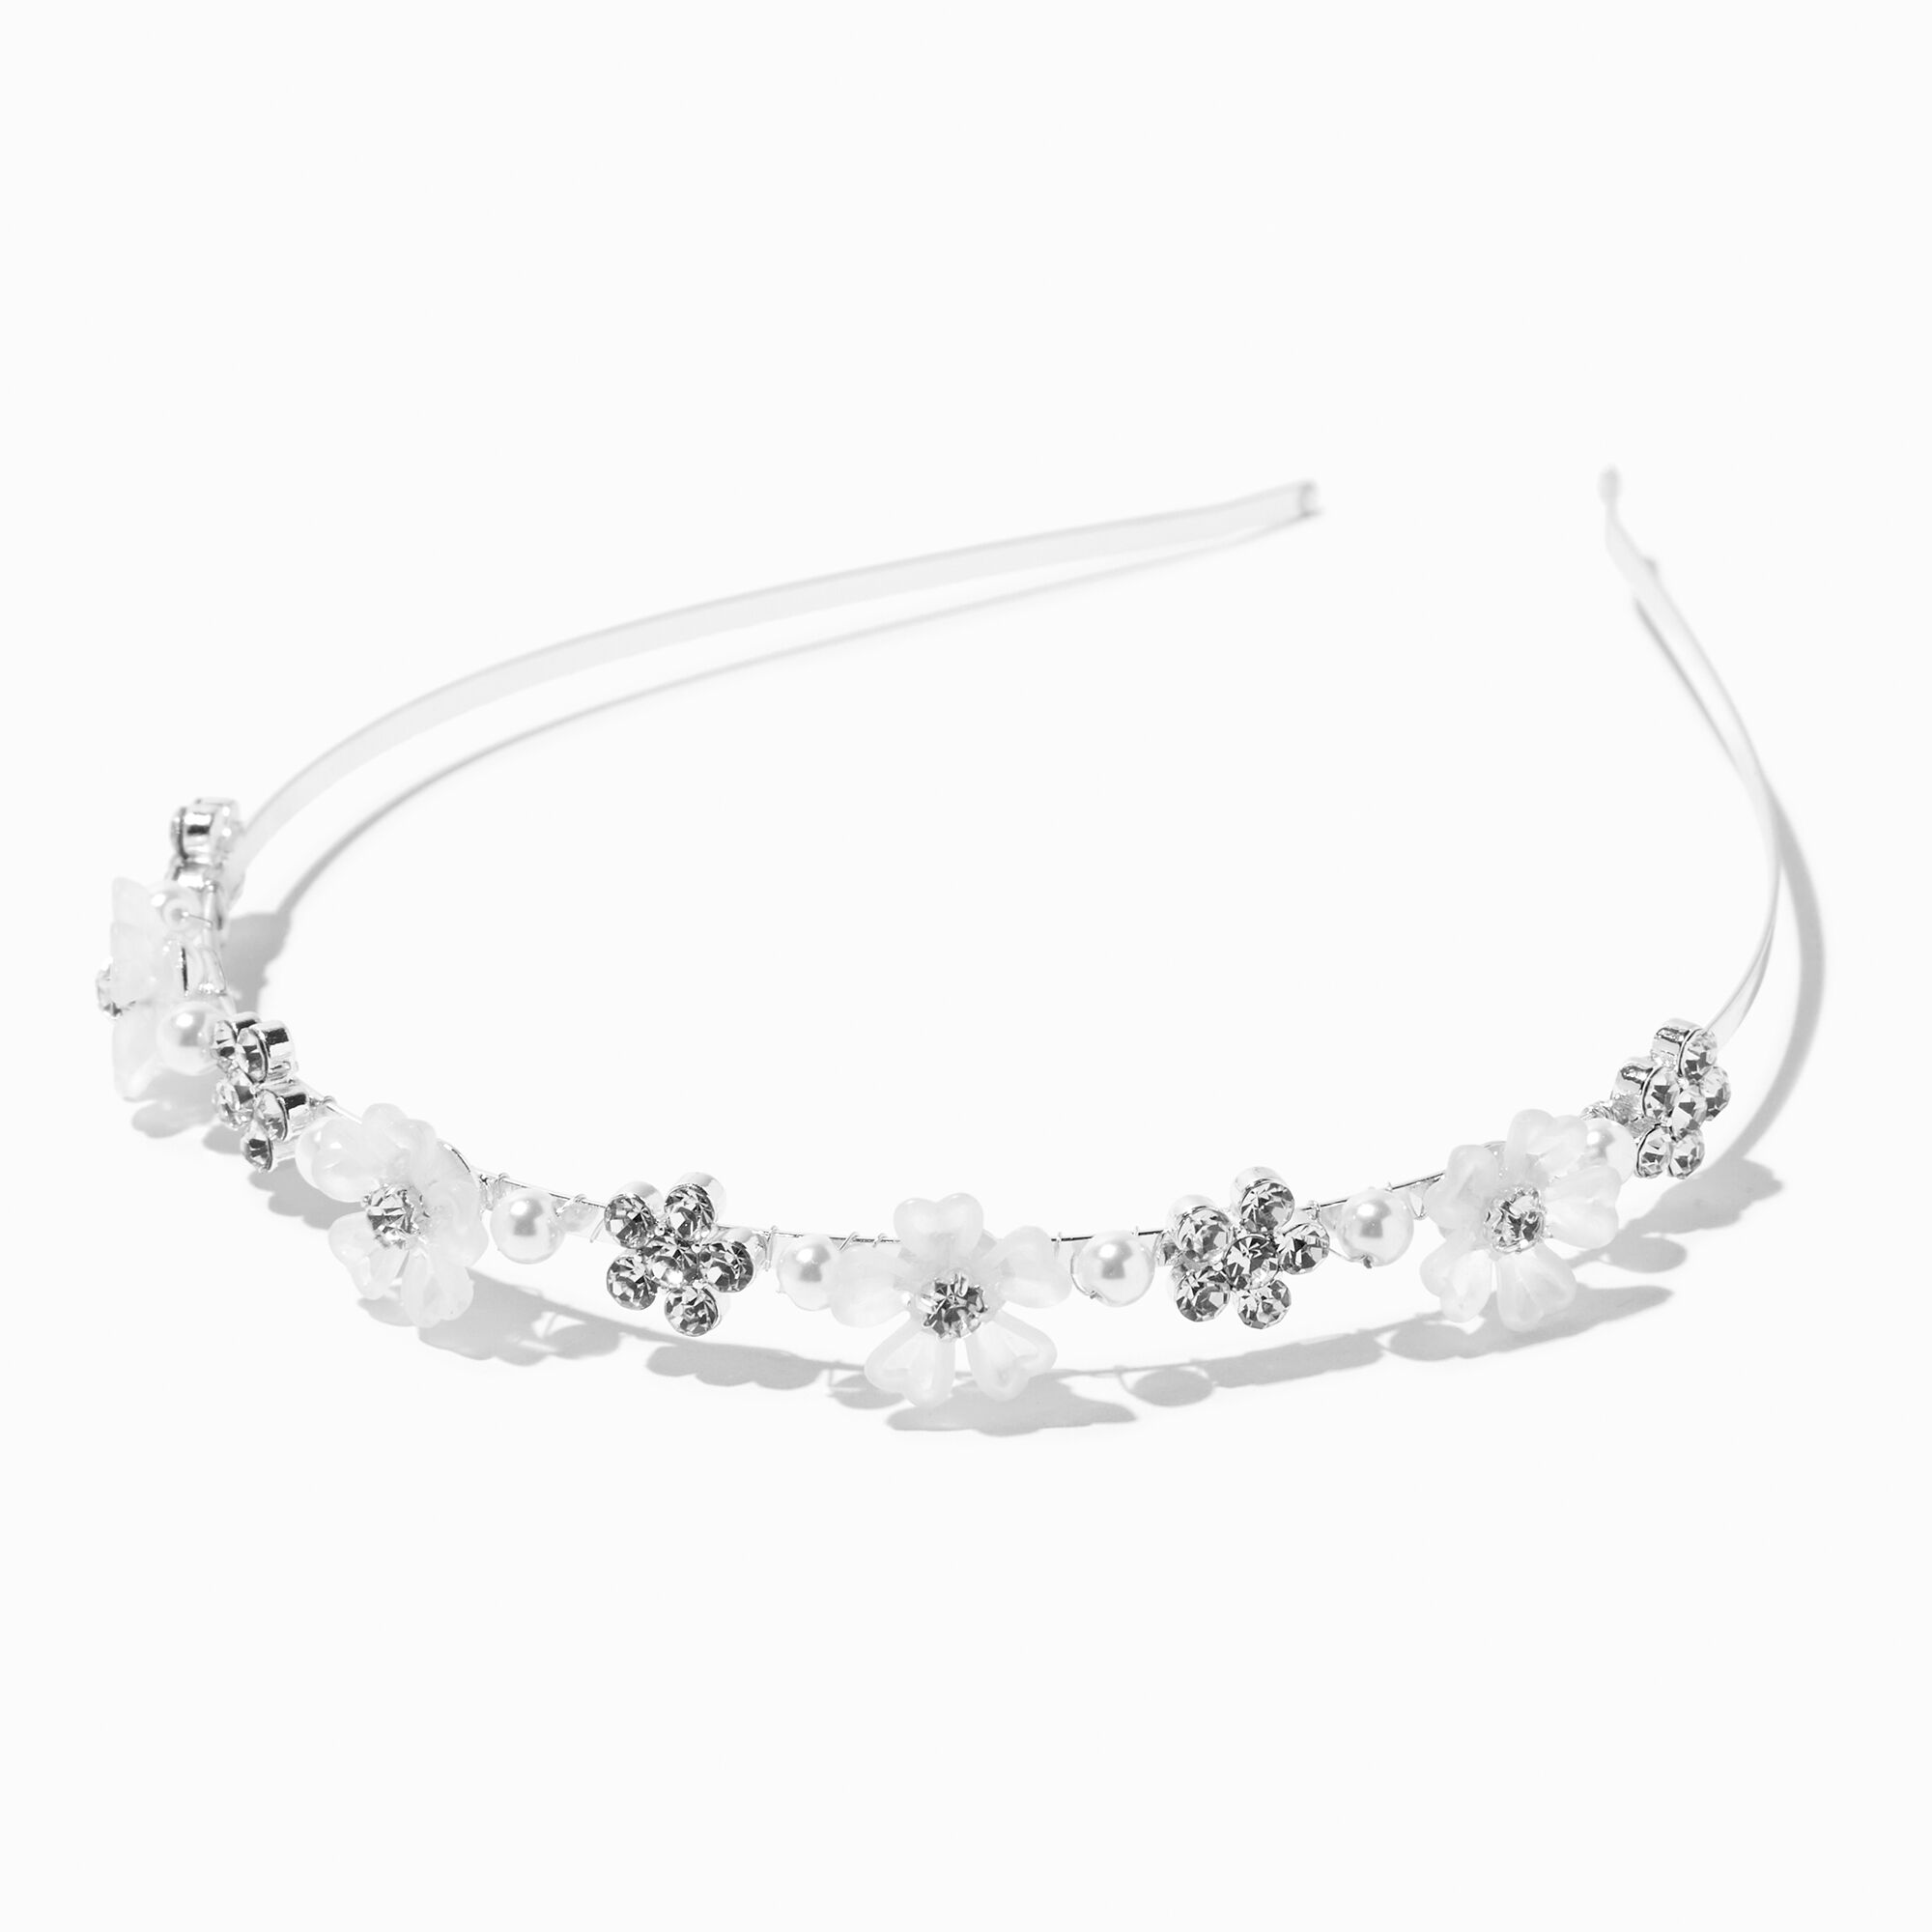 View Claires Tone Frosted Flower Headband Silver information